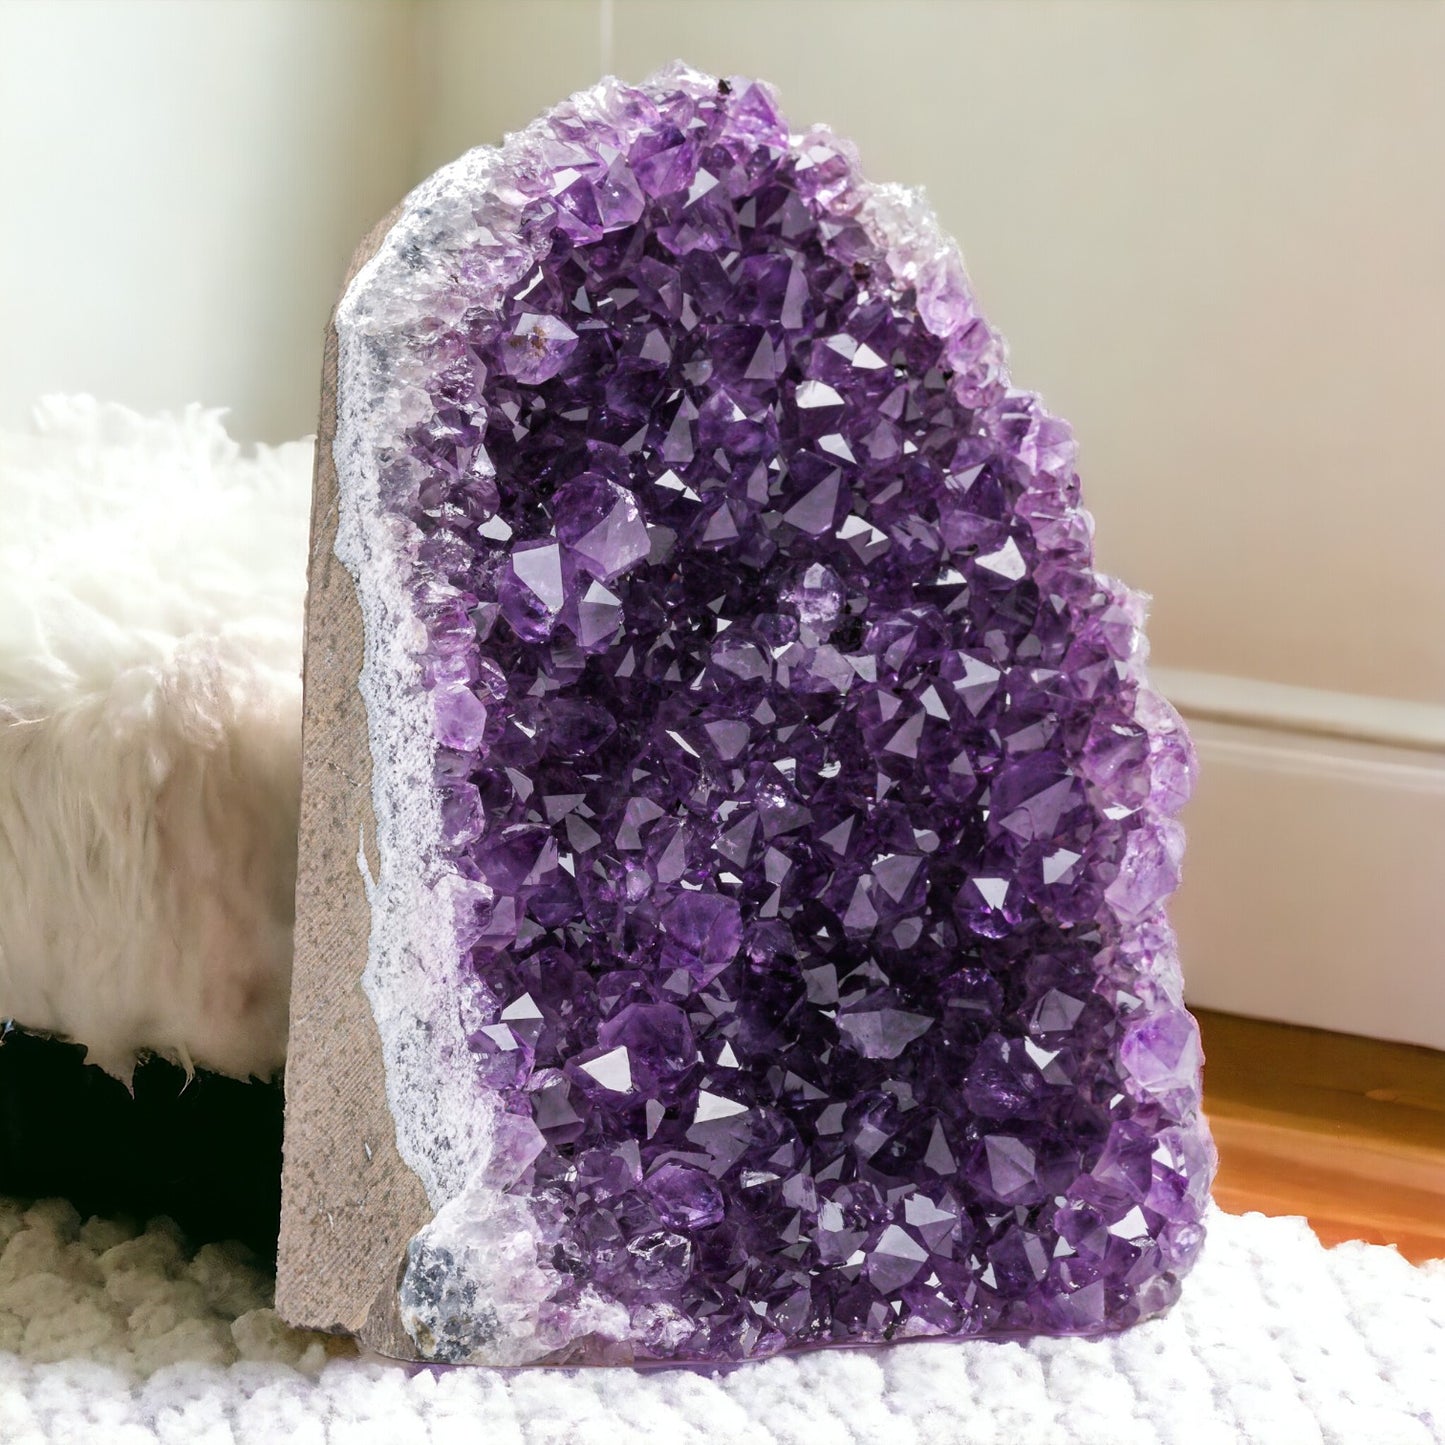 Deep Purple Natural Amethyst Crystal Clusters (3 lb to 4 lb) from Uruguay Raw Geode Quartz